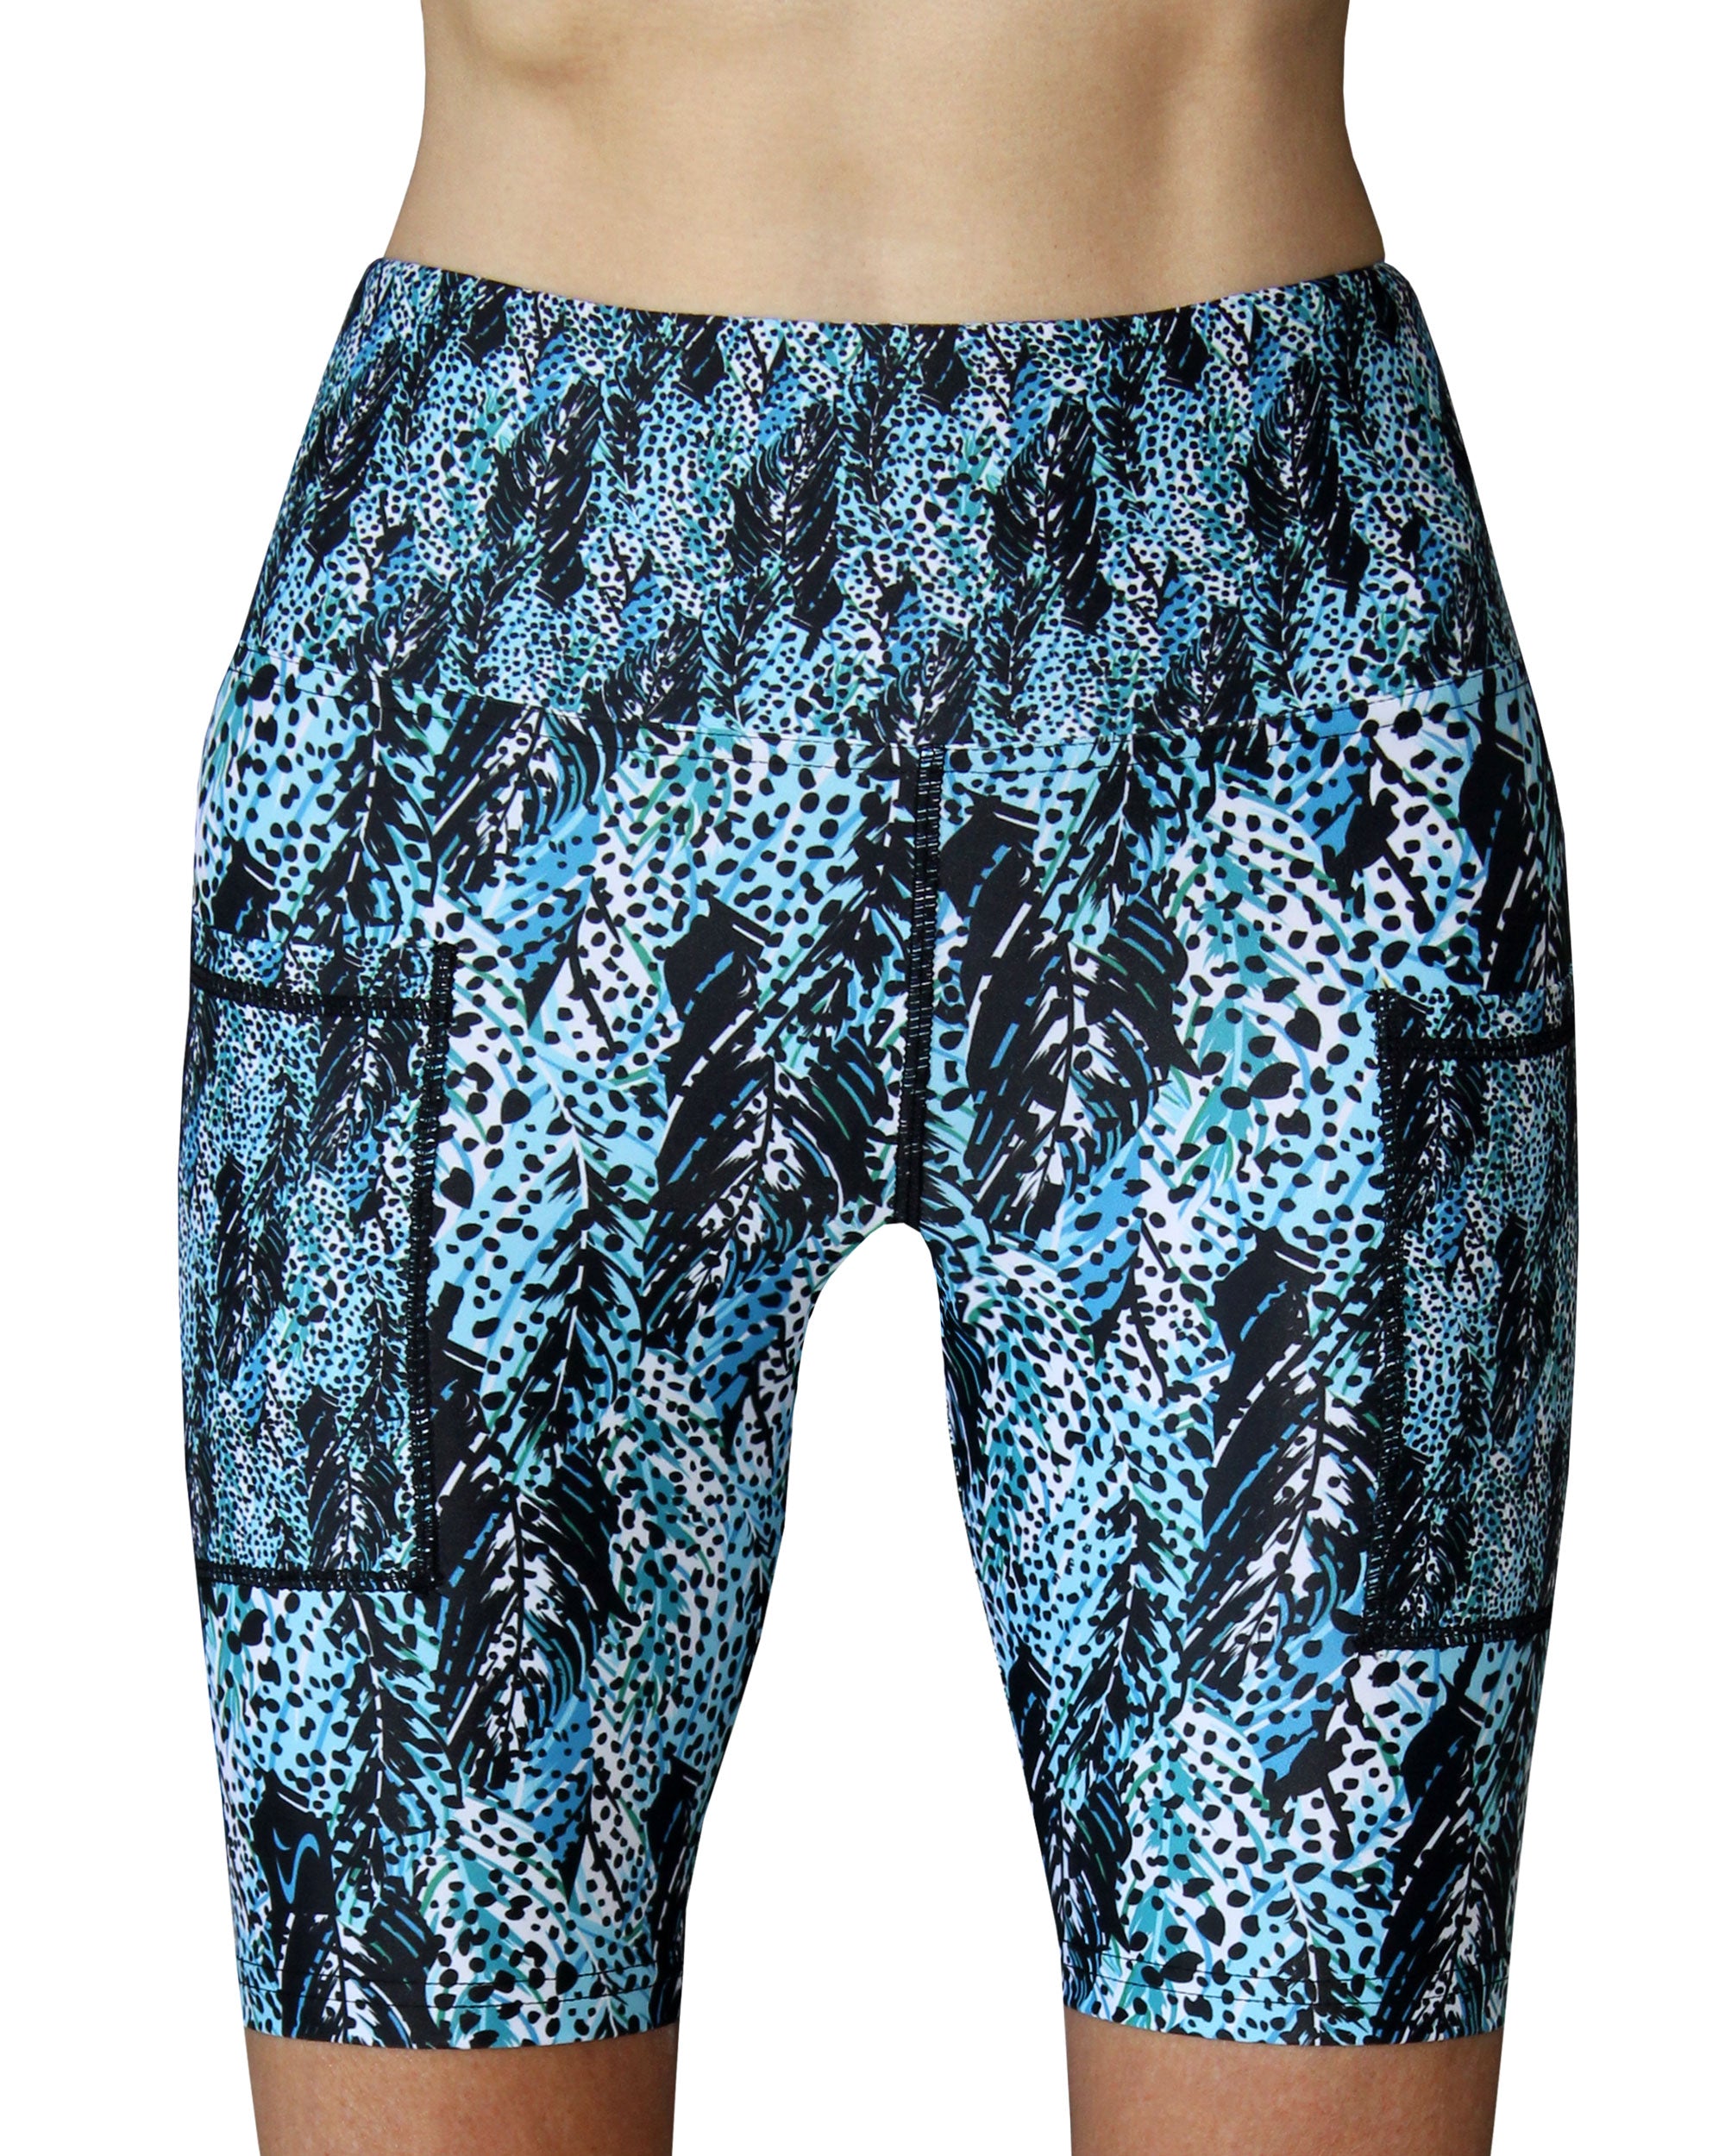 Funky Women's Shorts in blue and black. Perfect for running, paddling, padel, gym and pilates.